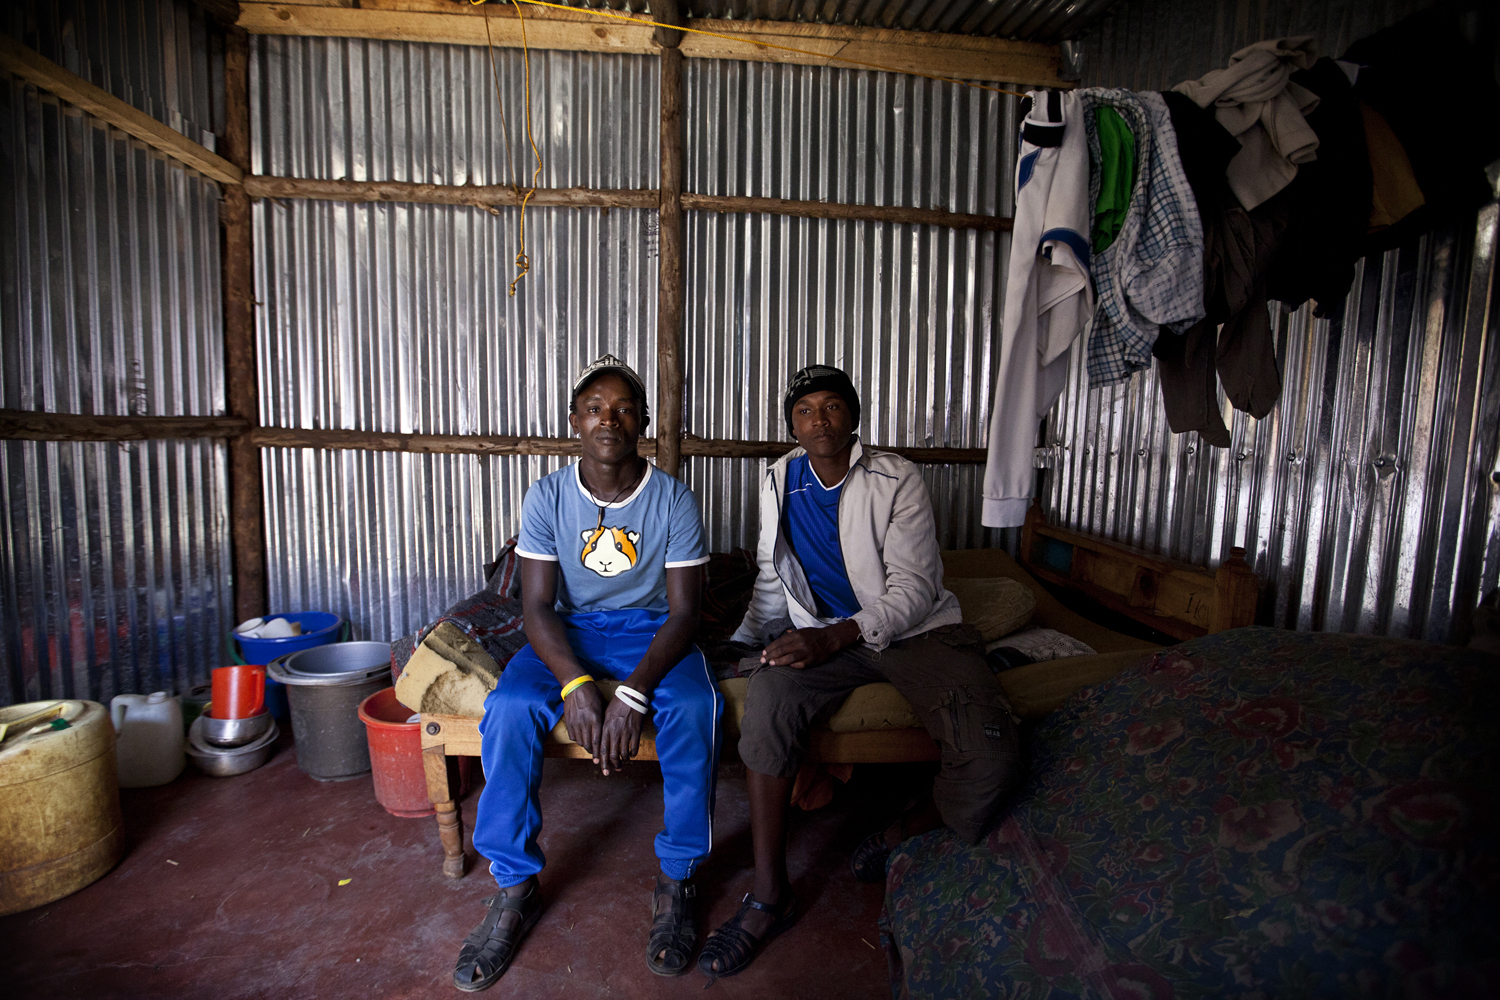  John and Antony.&nbsp;  John and Antony met and became friends while both living on the streets of Kawangware. They now share a one room home, and split the monthly rent of 1,500 Kenyan shillings (roughly $18 CAD). (2012)&nbsp; 